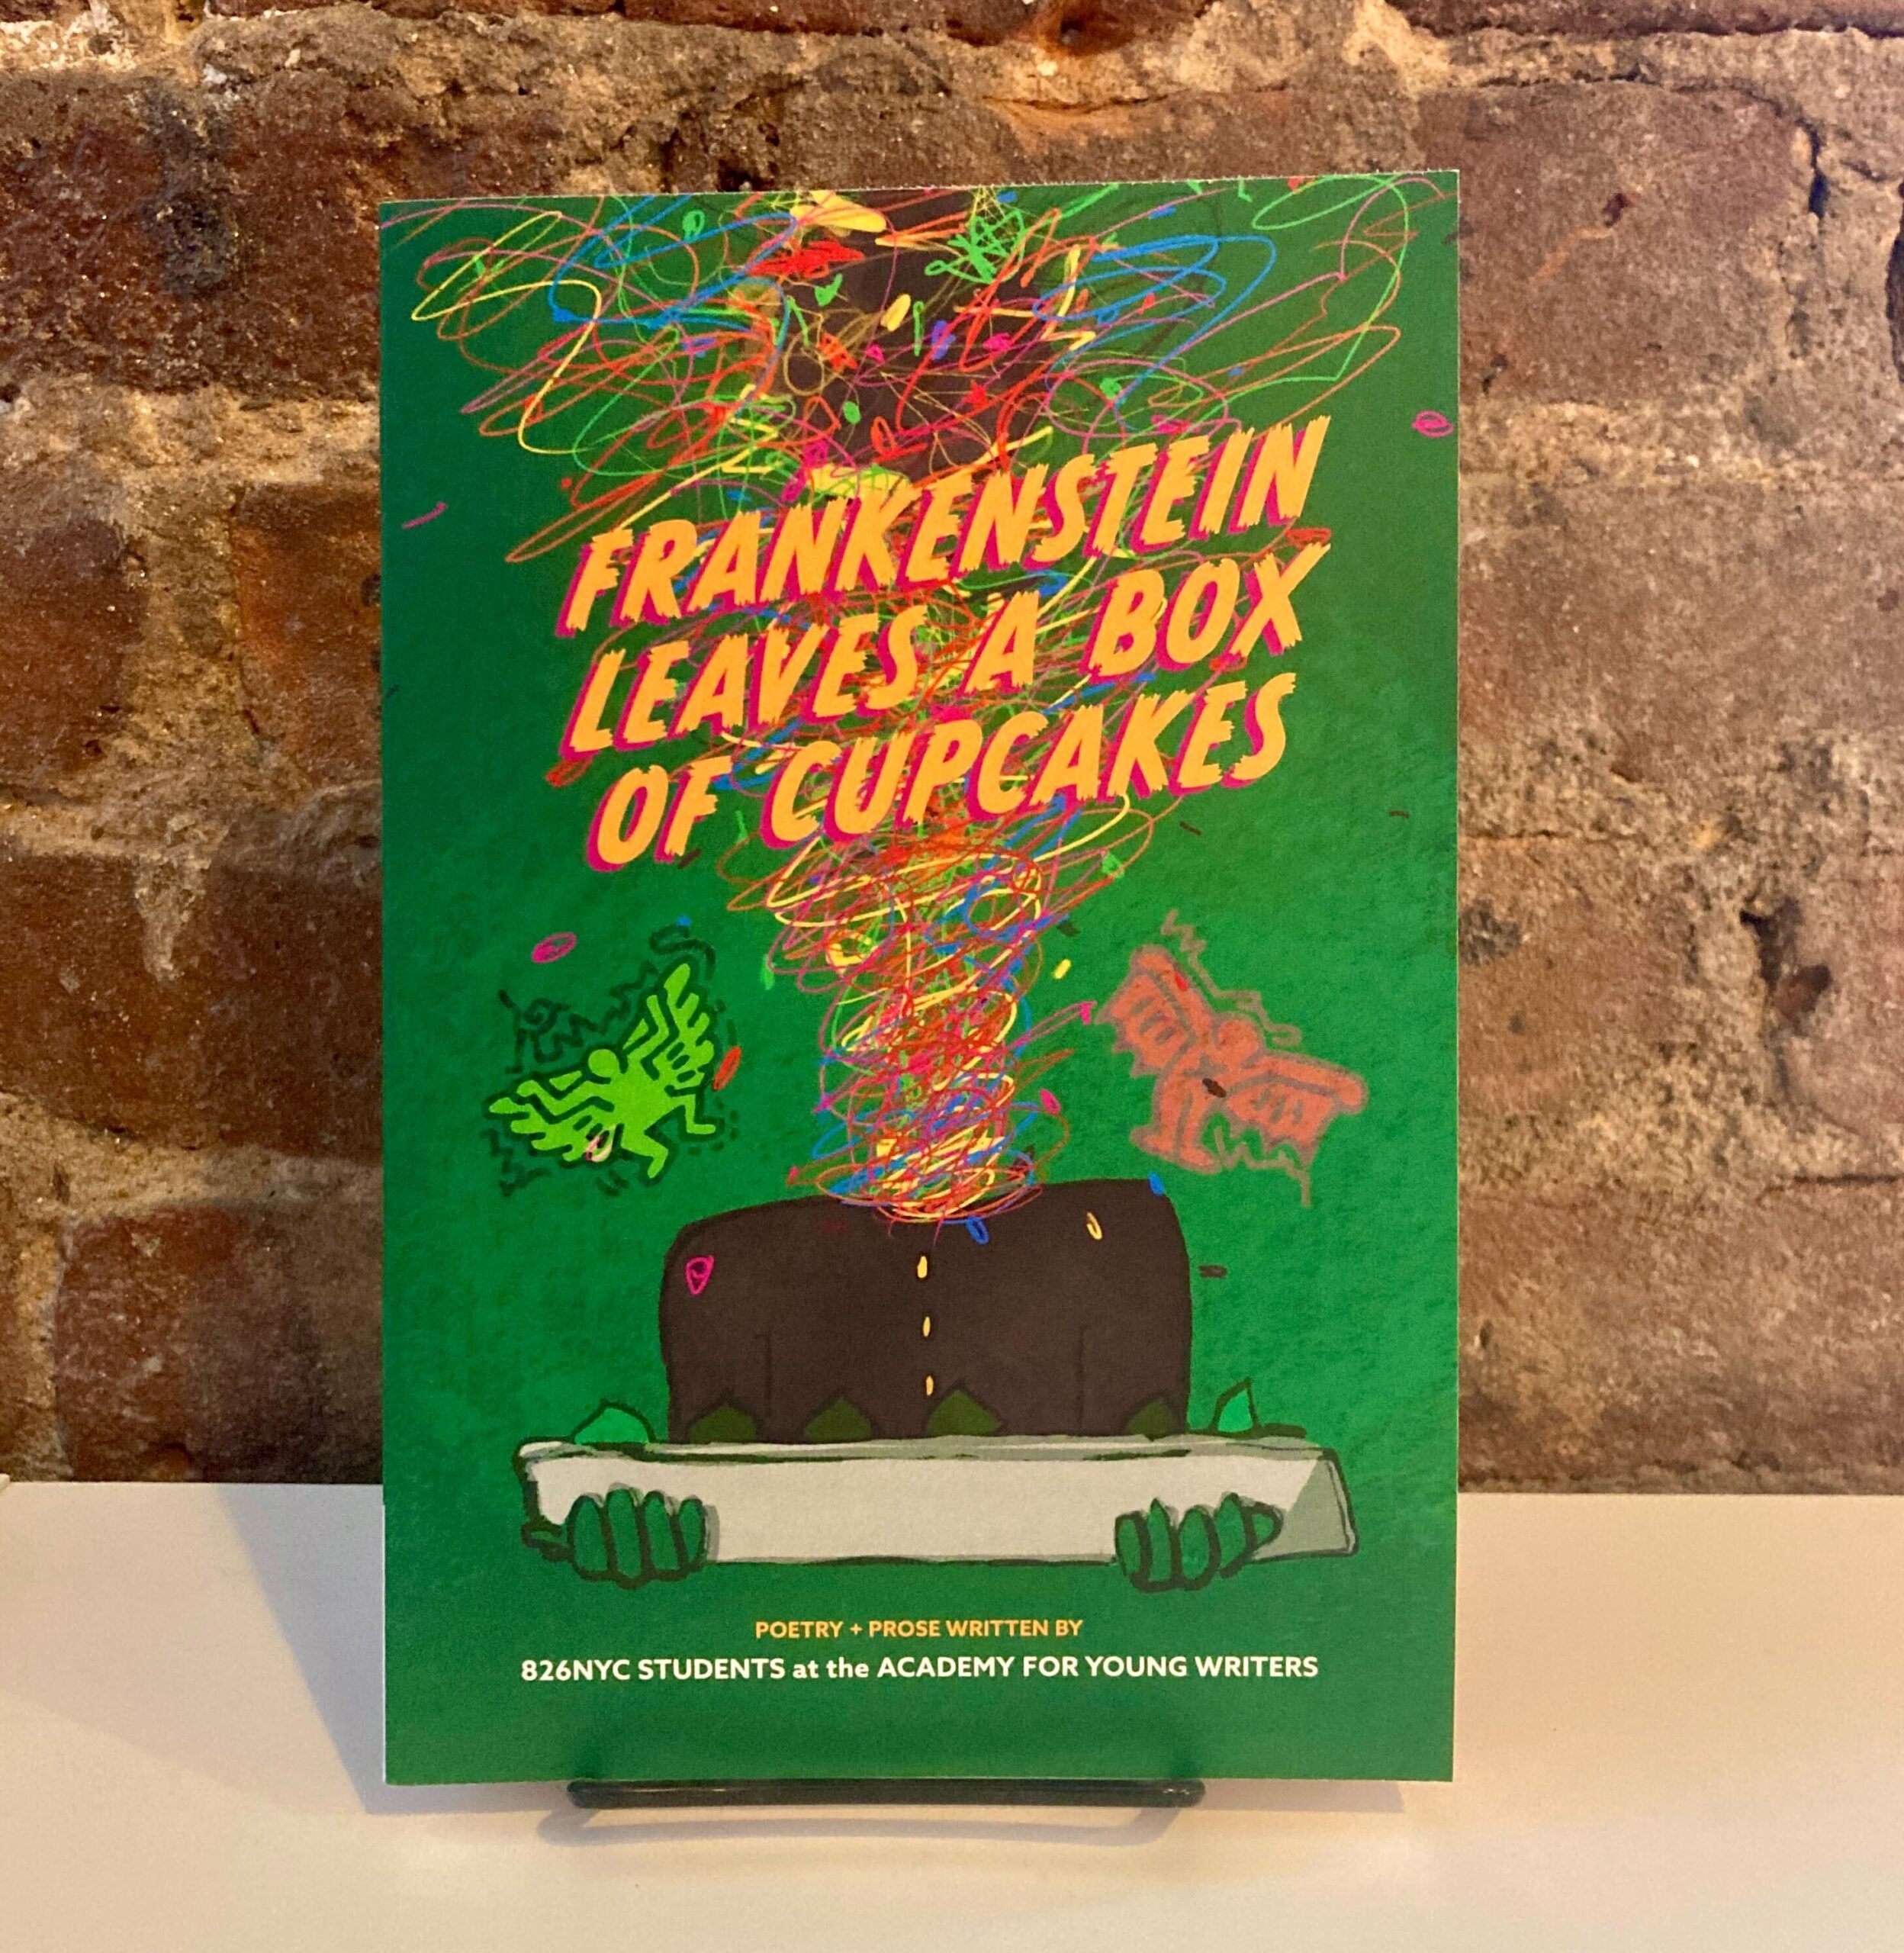 Cover of Frankenstein Leaves a Box of Cupcakes, a paperback book. The title is in vibrant orange letters on a green background, with a figure whose head is a giant scribble holding a tray.